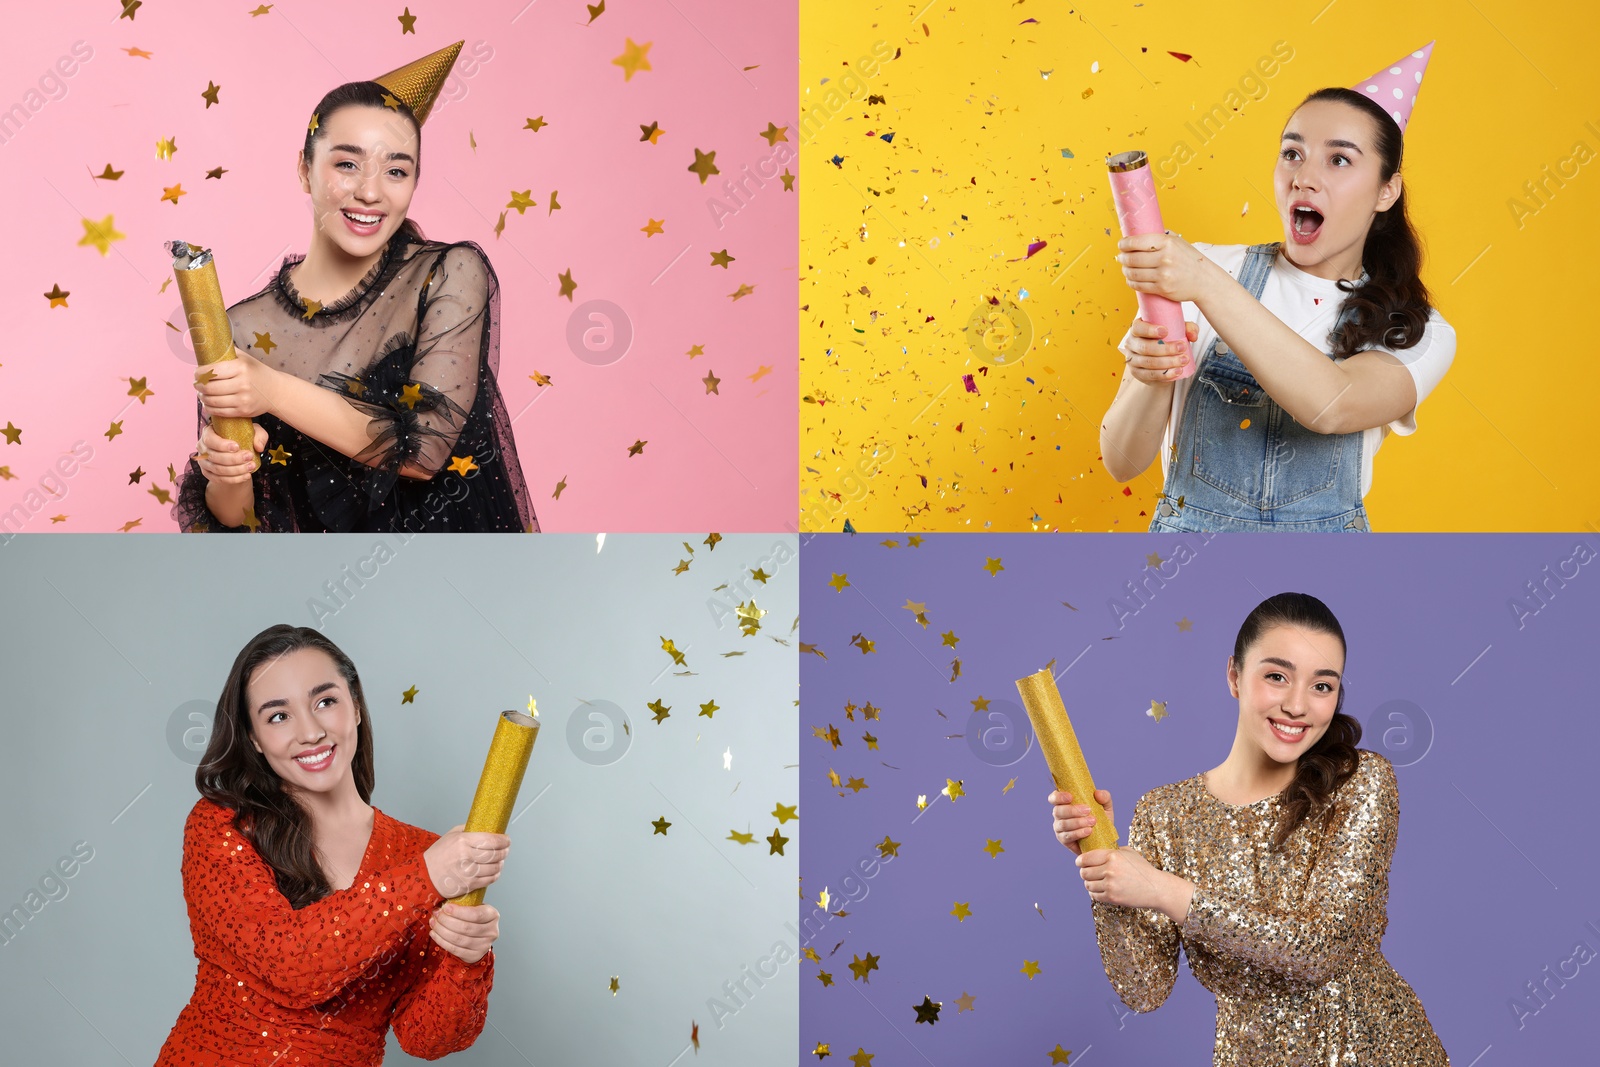 Image of Collage with photos of beautiful woman blowing up party poppers on different color backgrounds